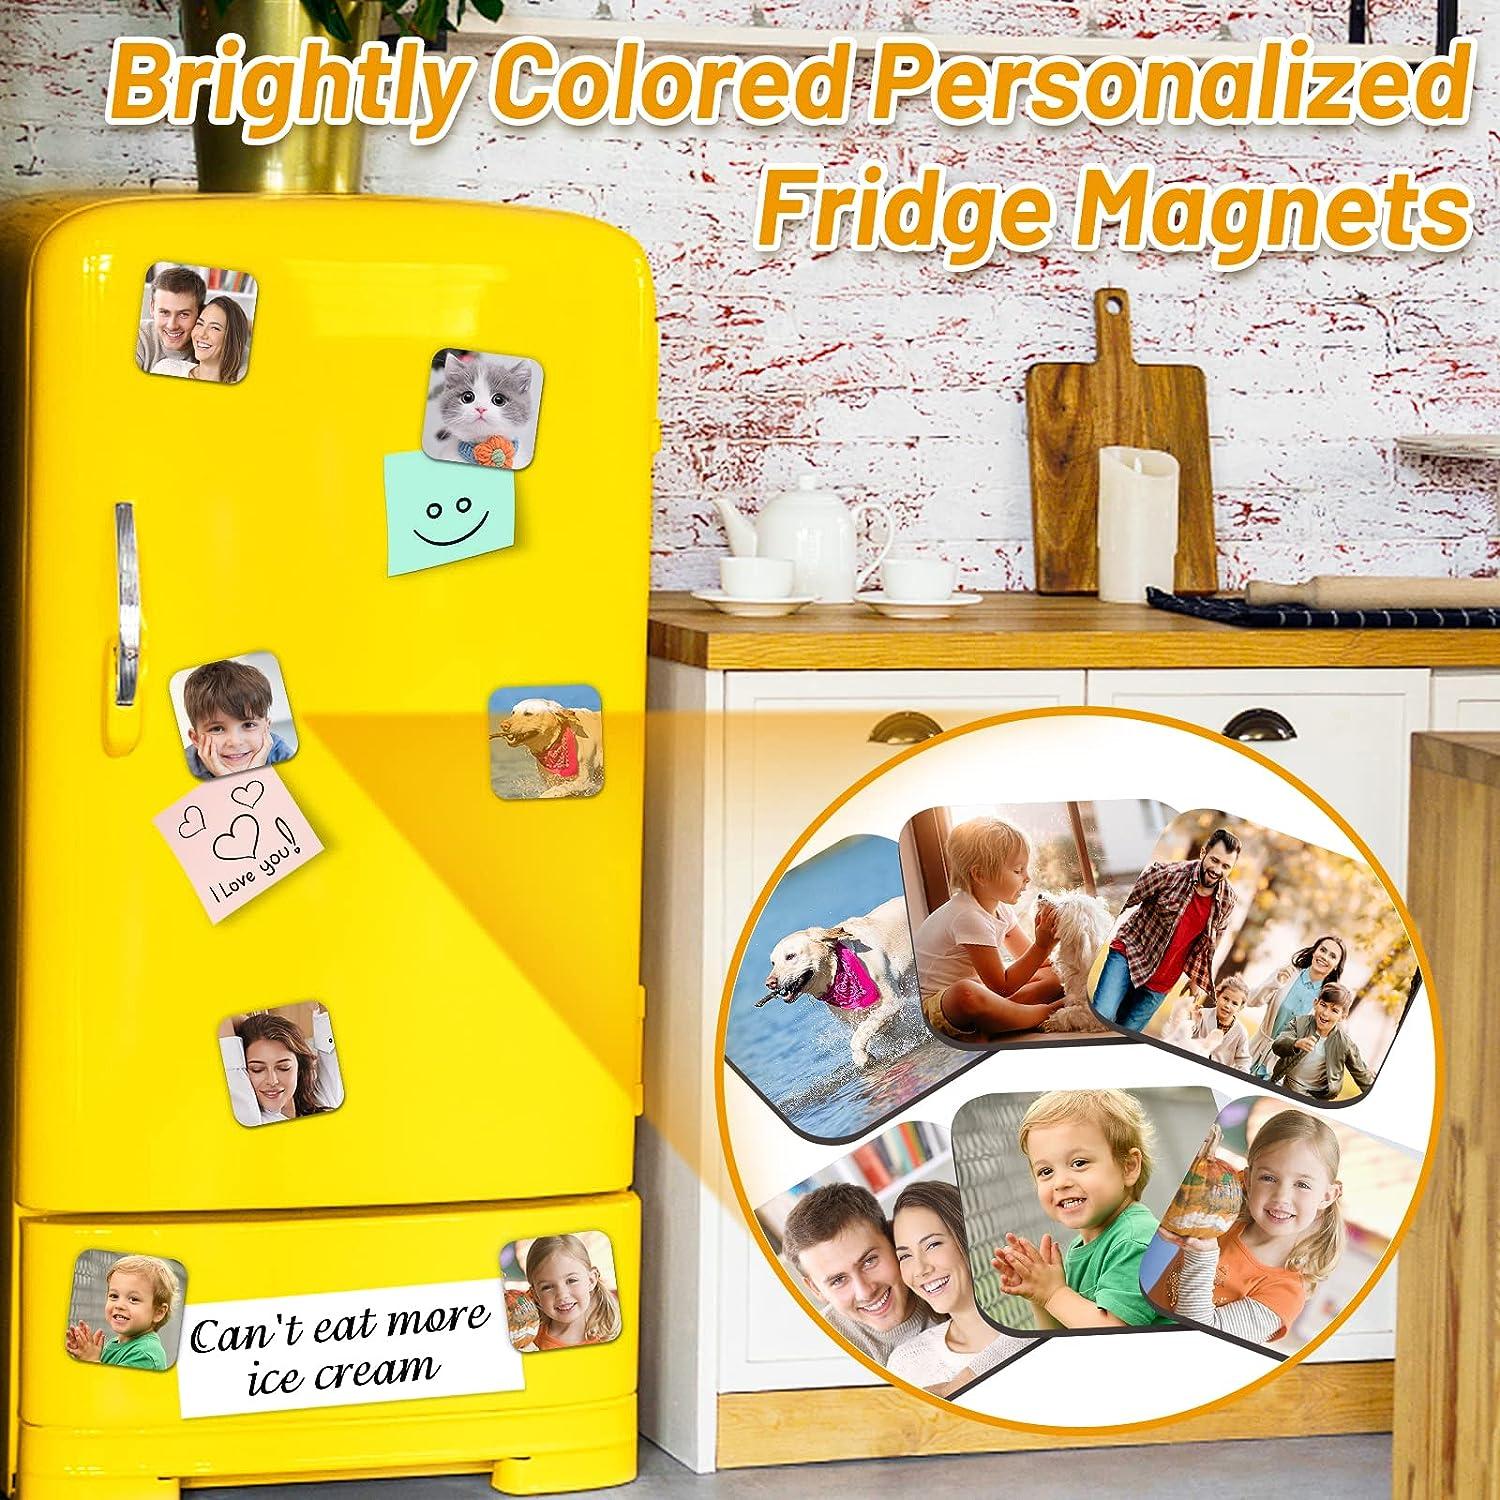 Wholesale Customizable 4x6 Inch Sublimation Photo Magnets Slates Perfect  For Weddings, Birthdays, And Baby Photo Magnetsshoots From Belkin, $2.77